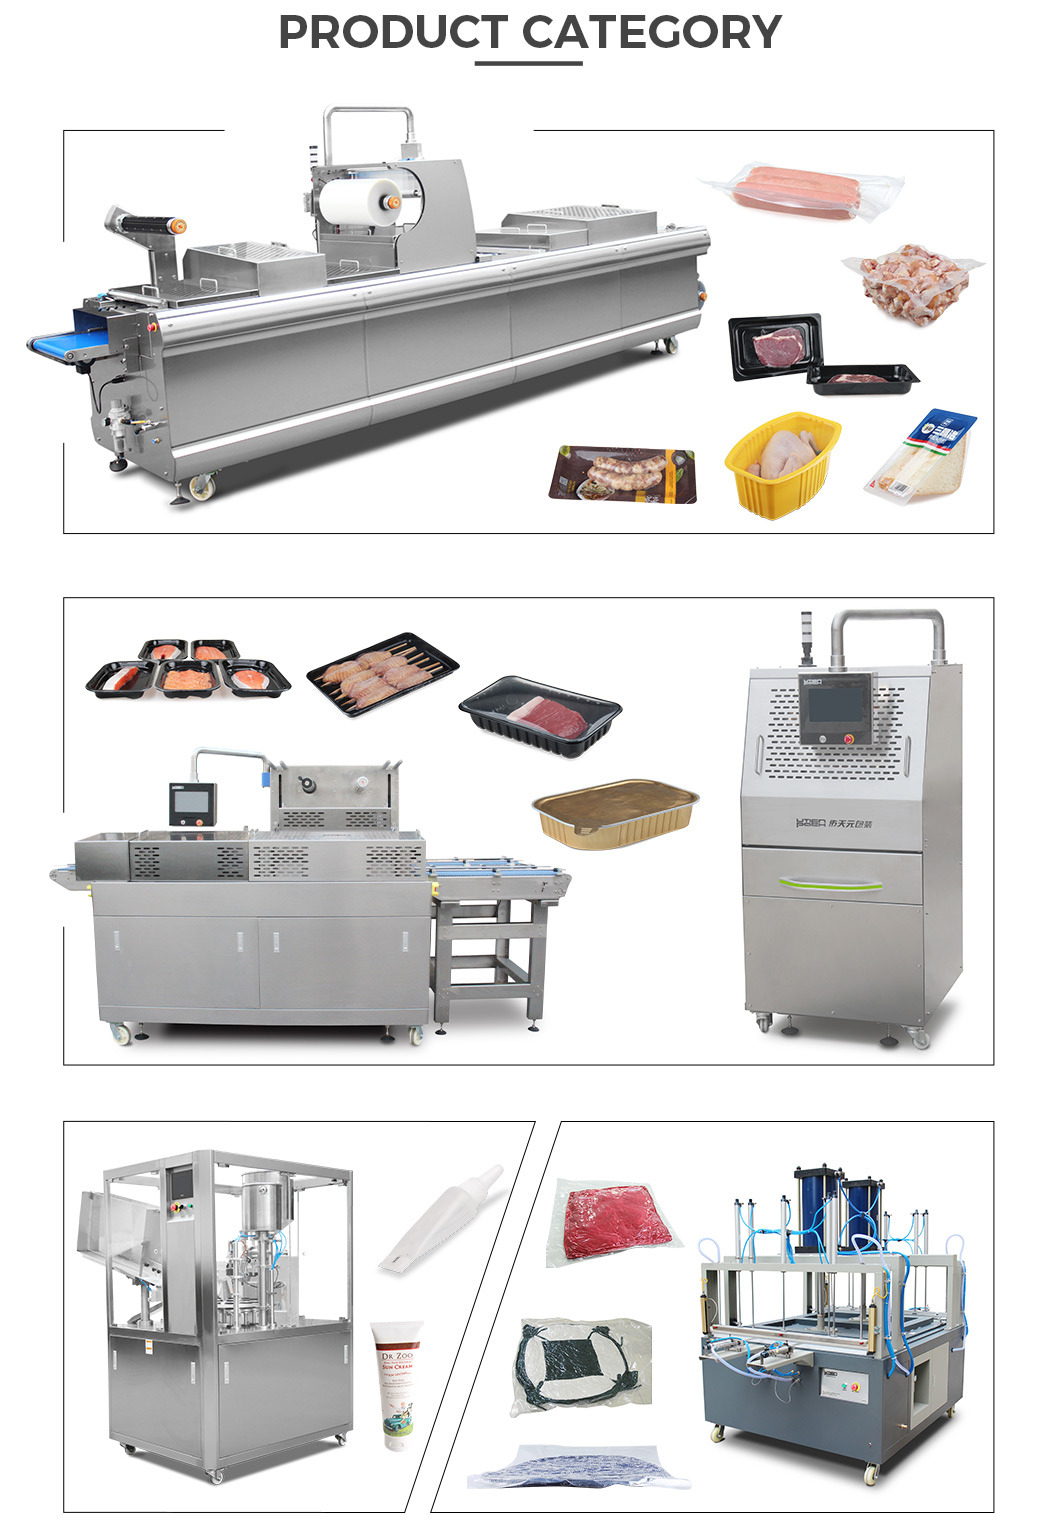 Superior and Well Made Fully Automatic Vacuum Tray Sealer